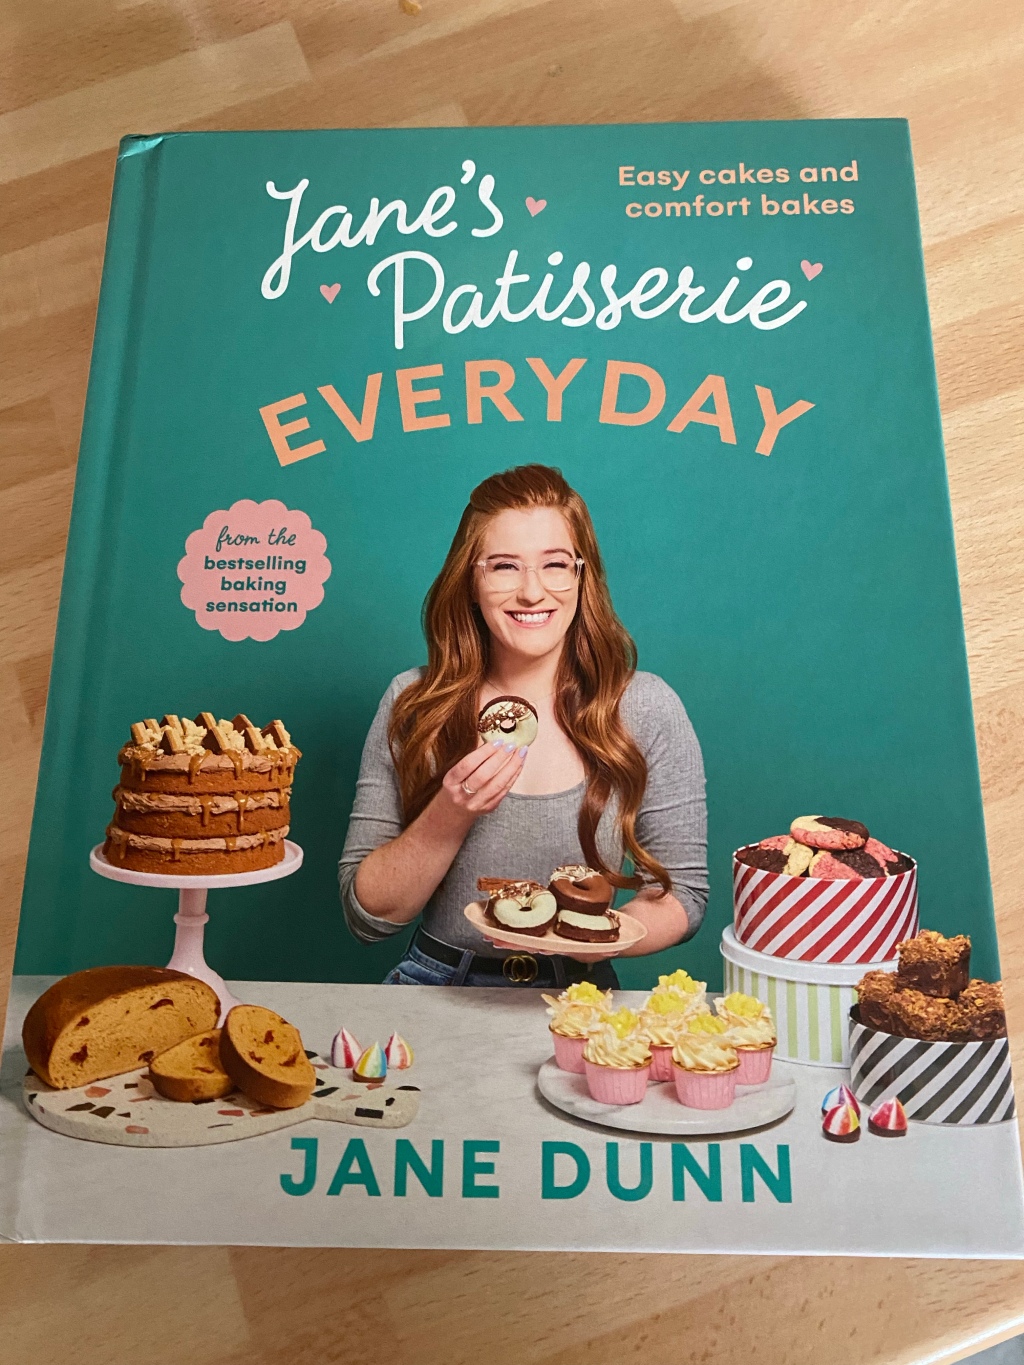 Jane’s Patisserie Everyday- a Book Review.